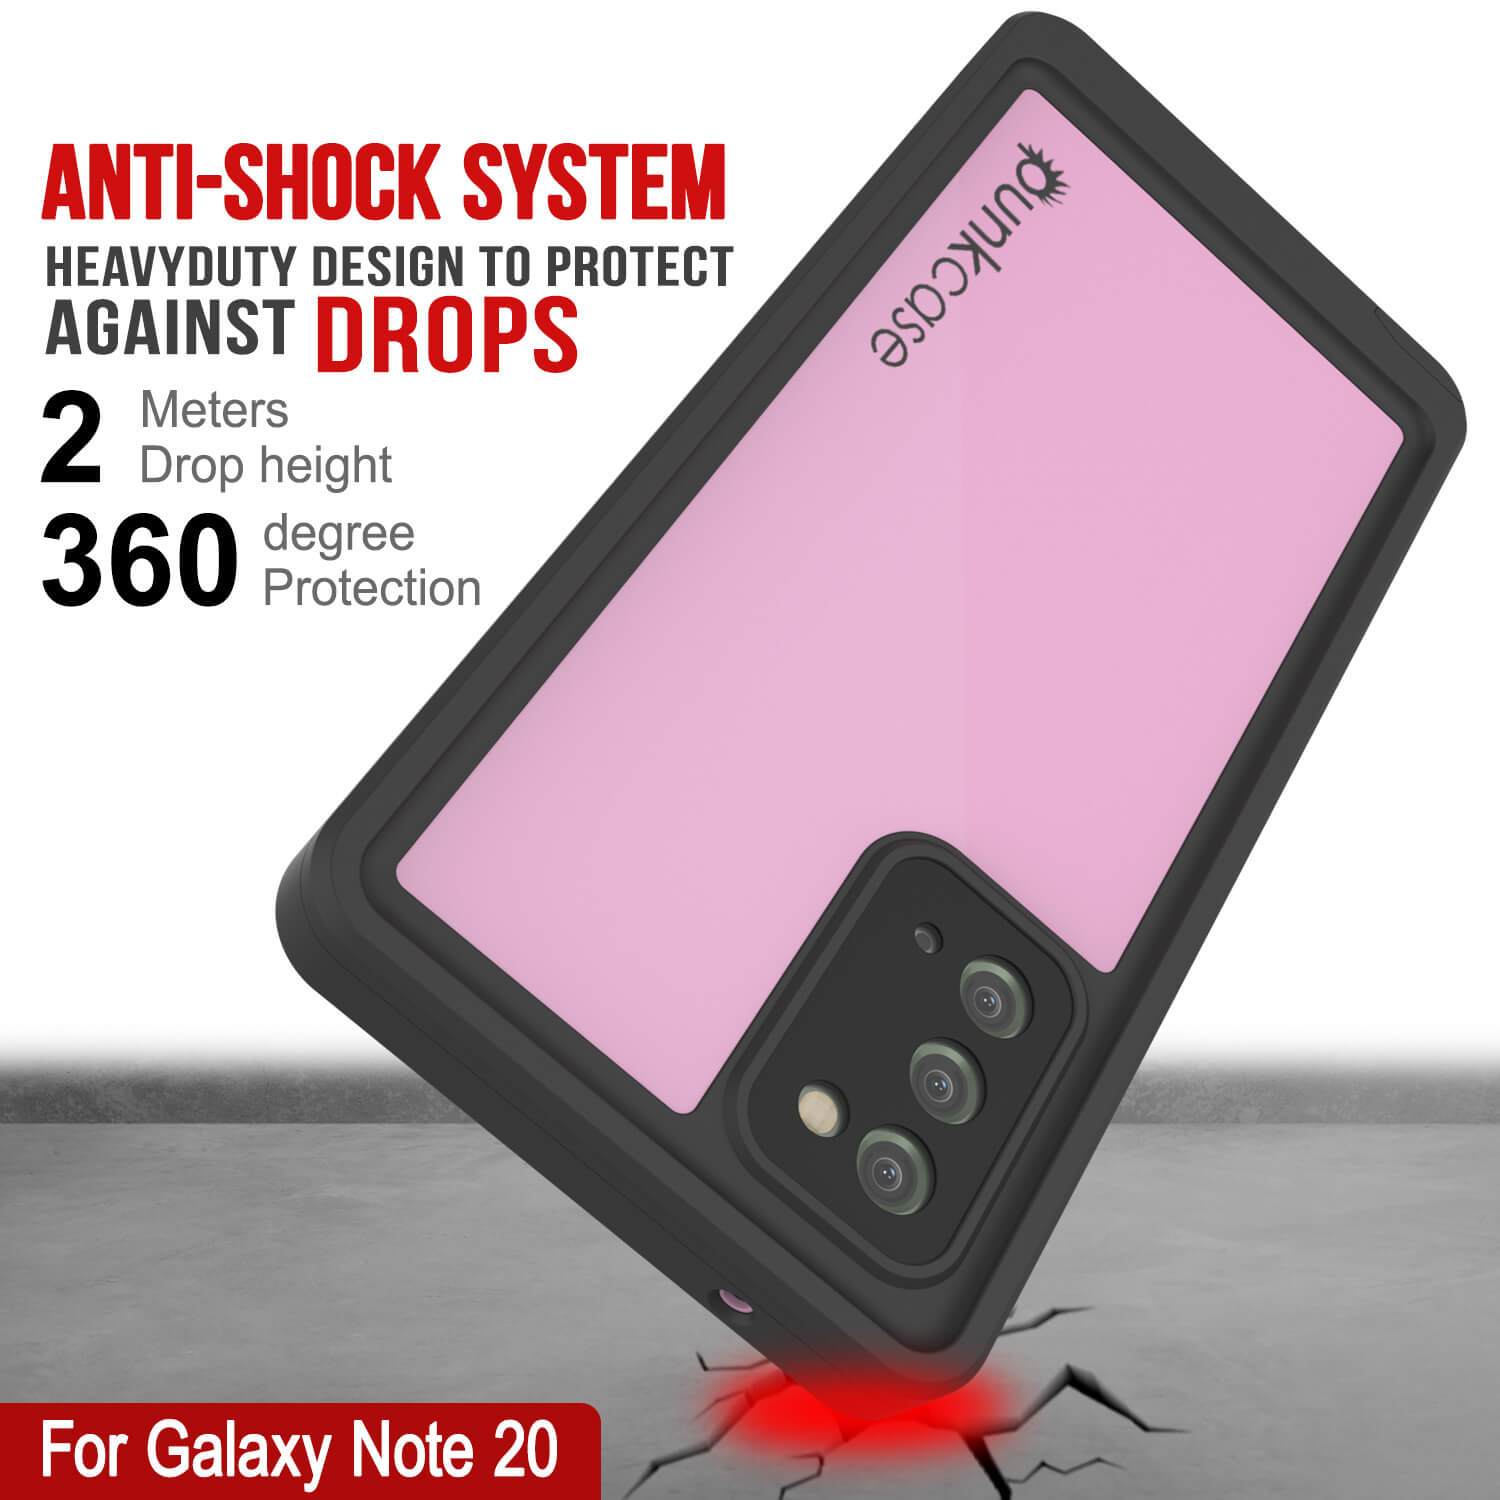 Galaxy Note 20 Waterproof Case, Punkcase Studstar Pink Thin Armor Cover